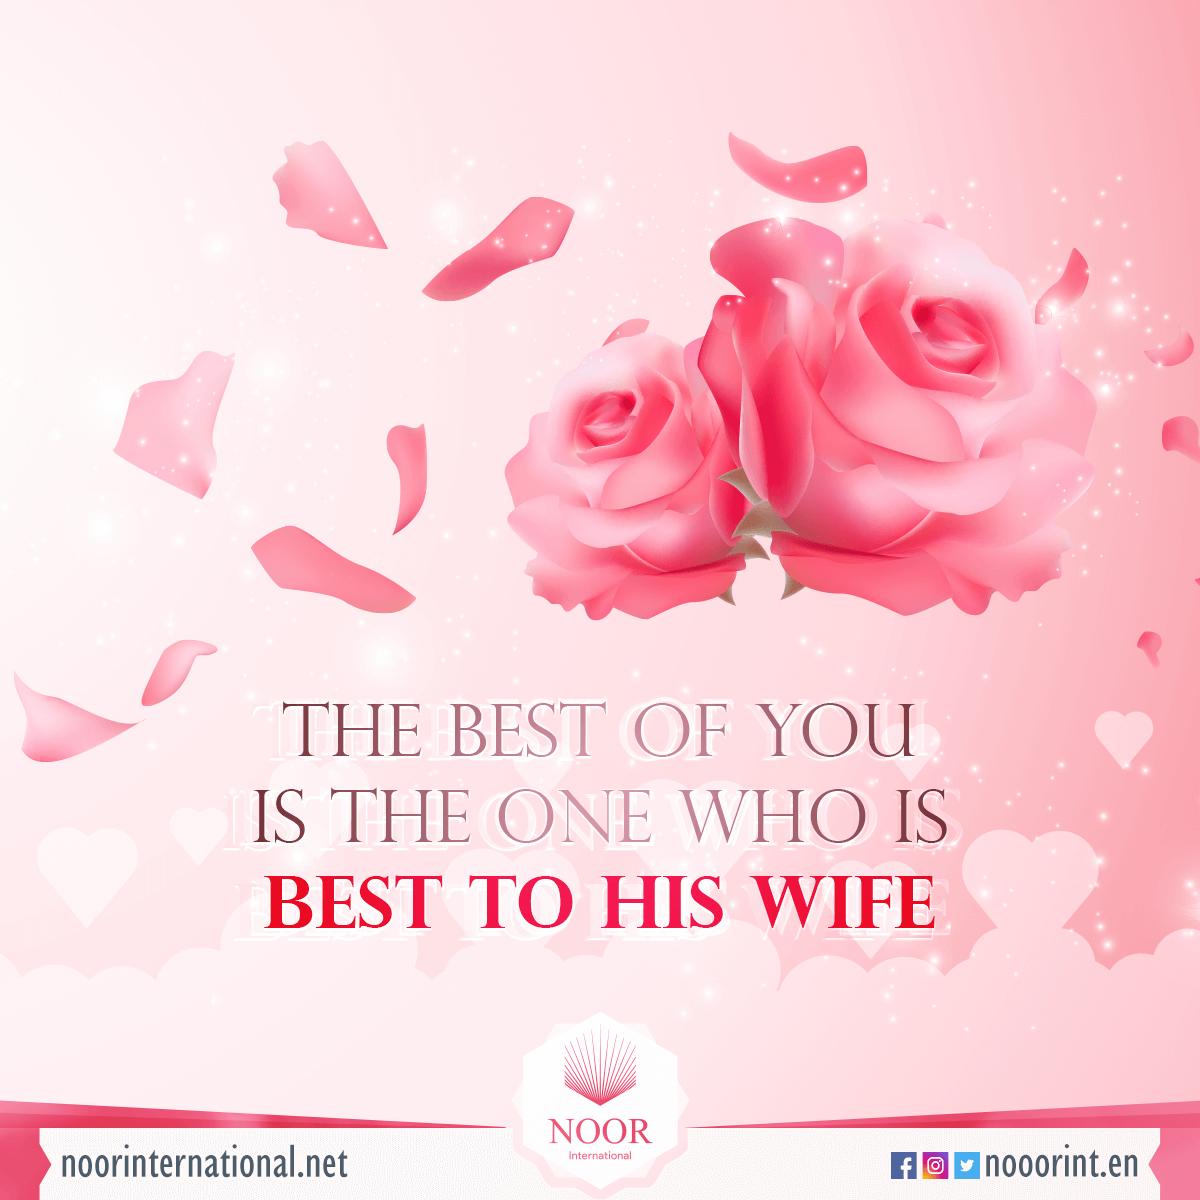 The best of you is the one who is best to his wife